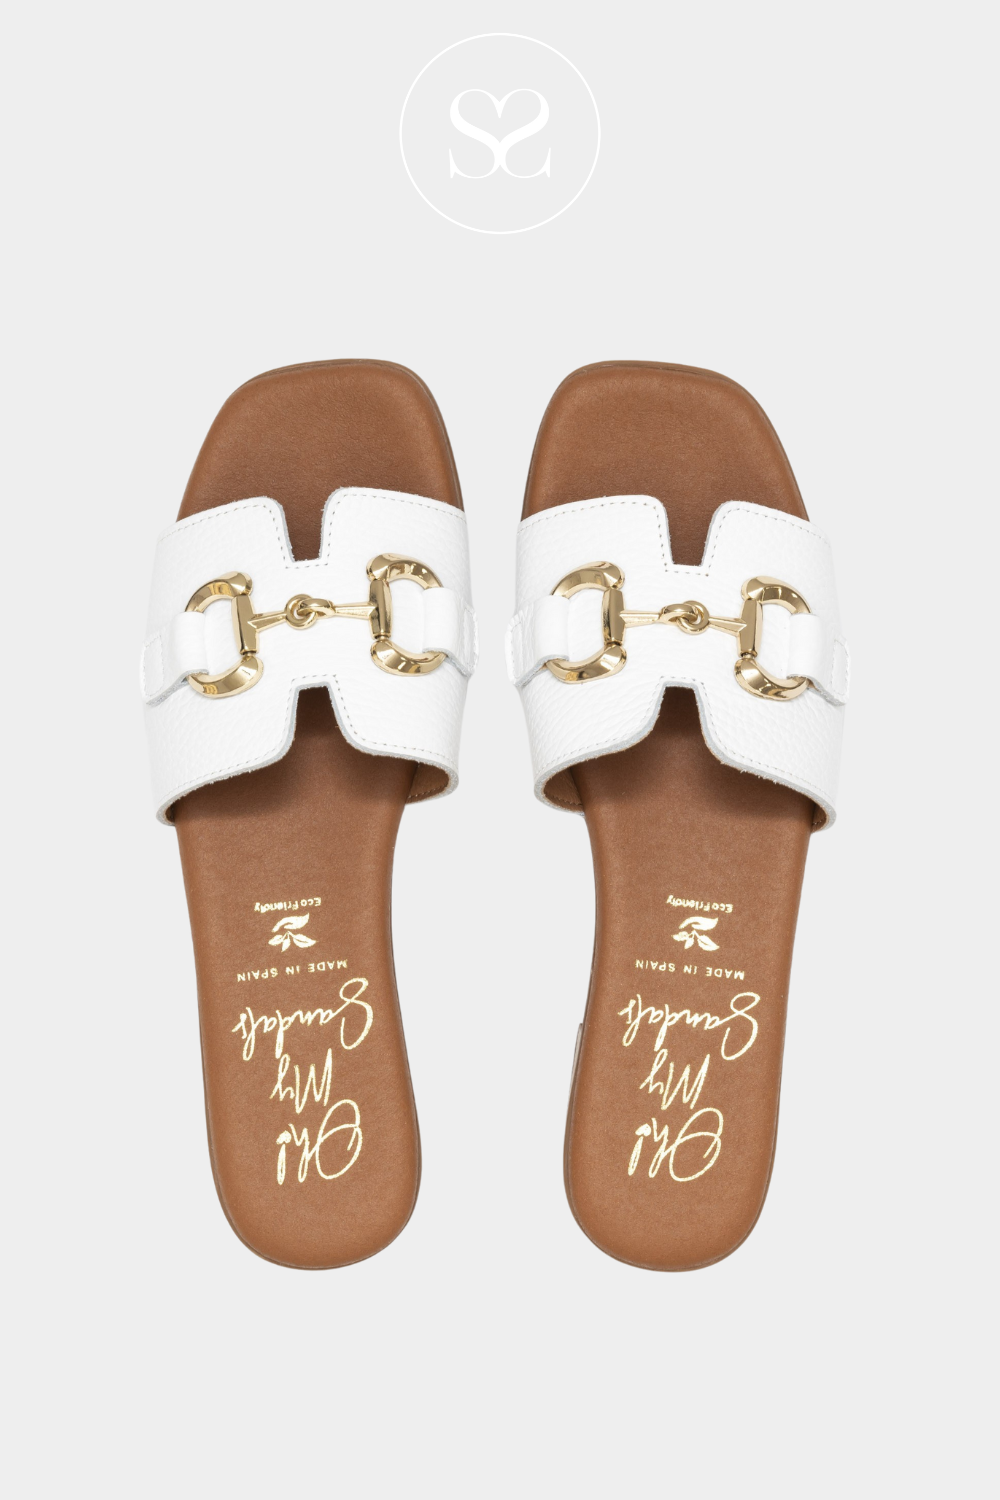 OH MY SANDALS 5340 WHITE LEATHER SLIDER SANDALS WITH GOLD CHAIN BUCKLE AND SLIGHT HEEL